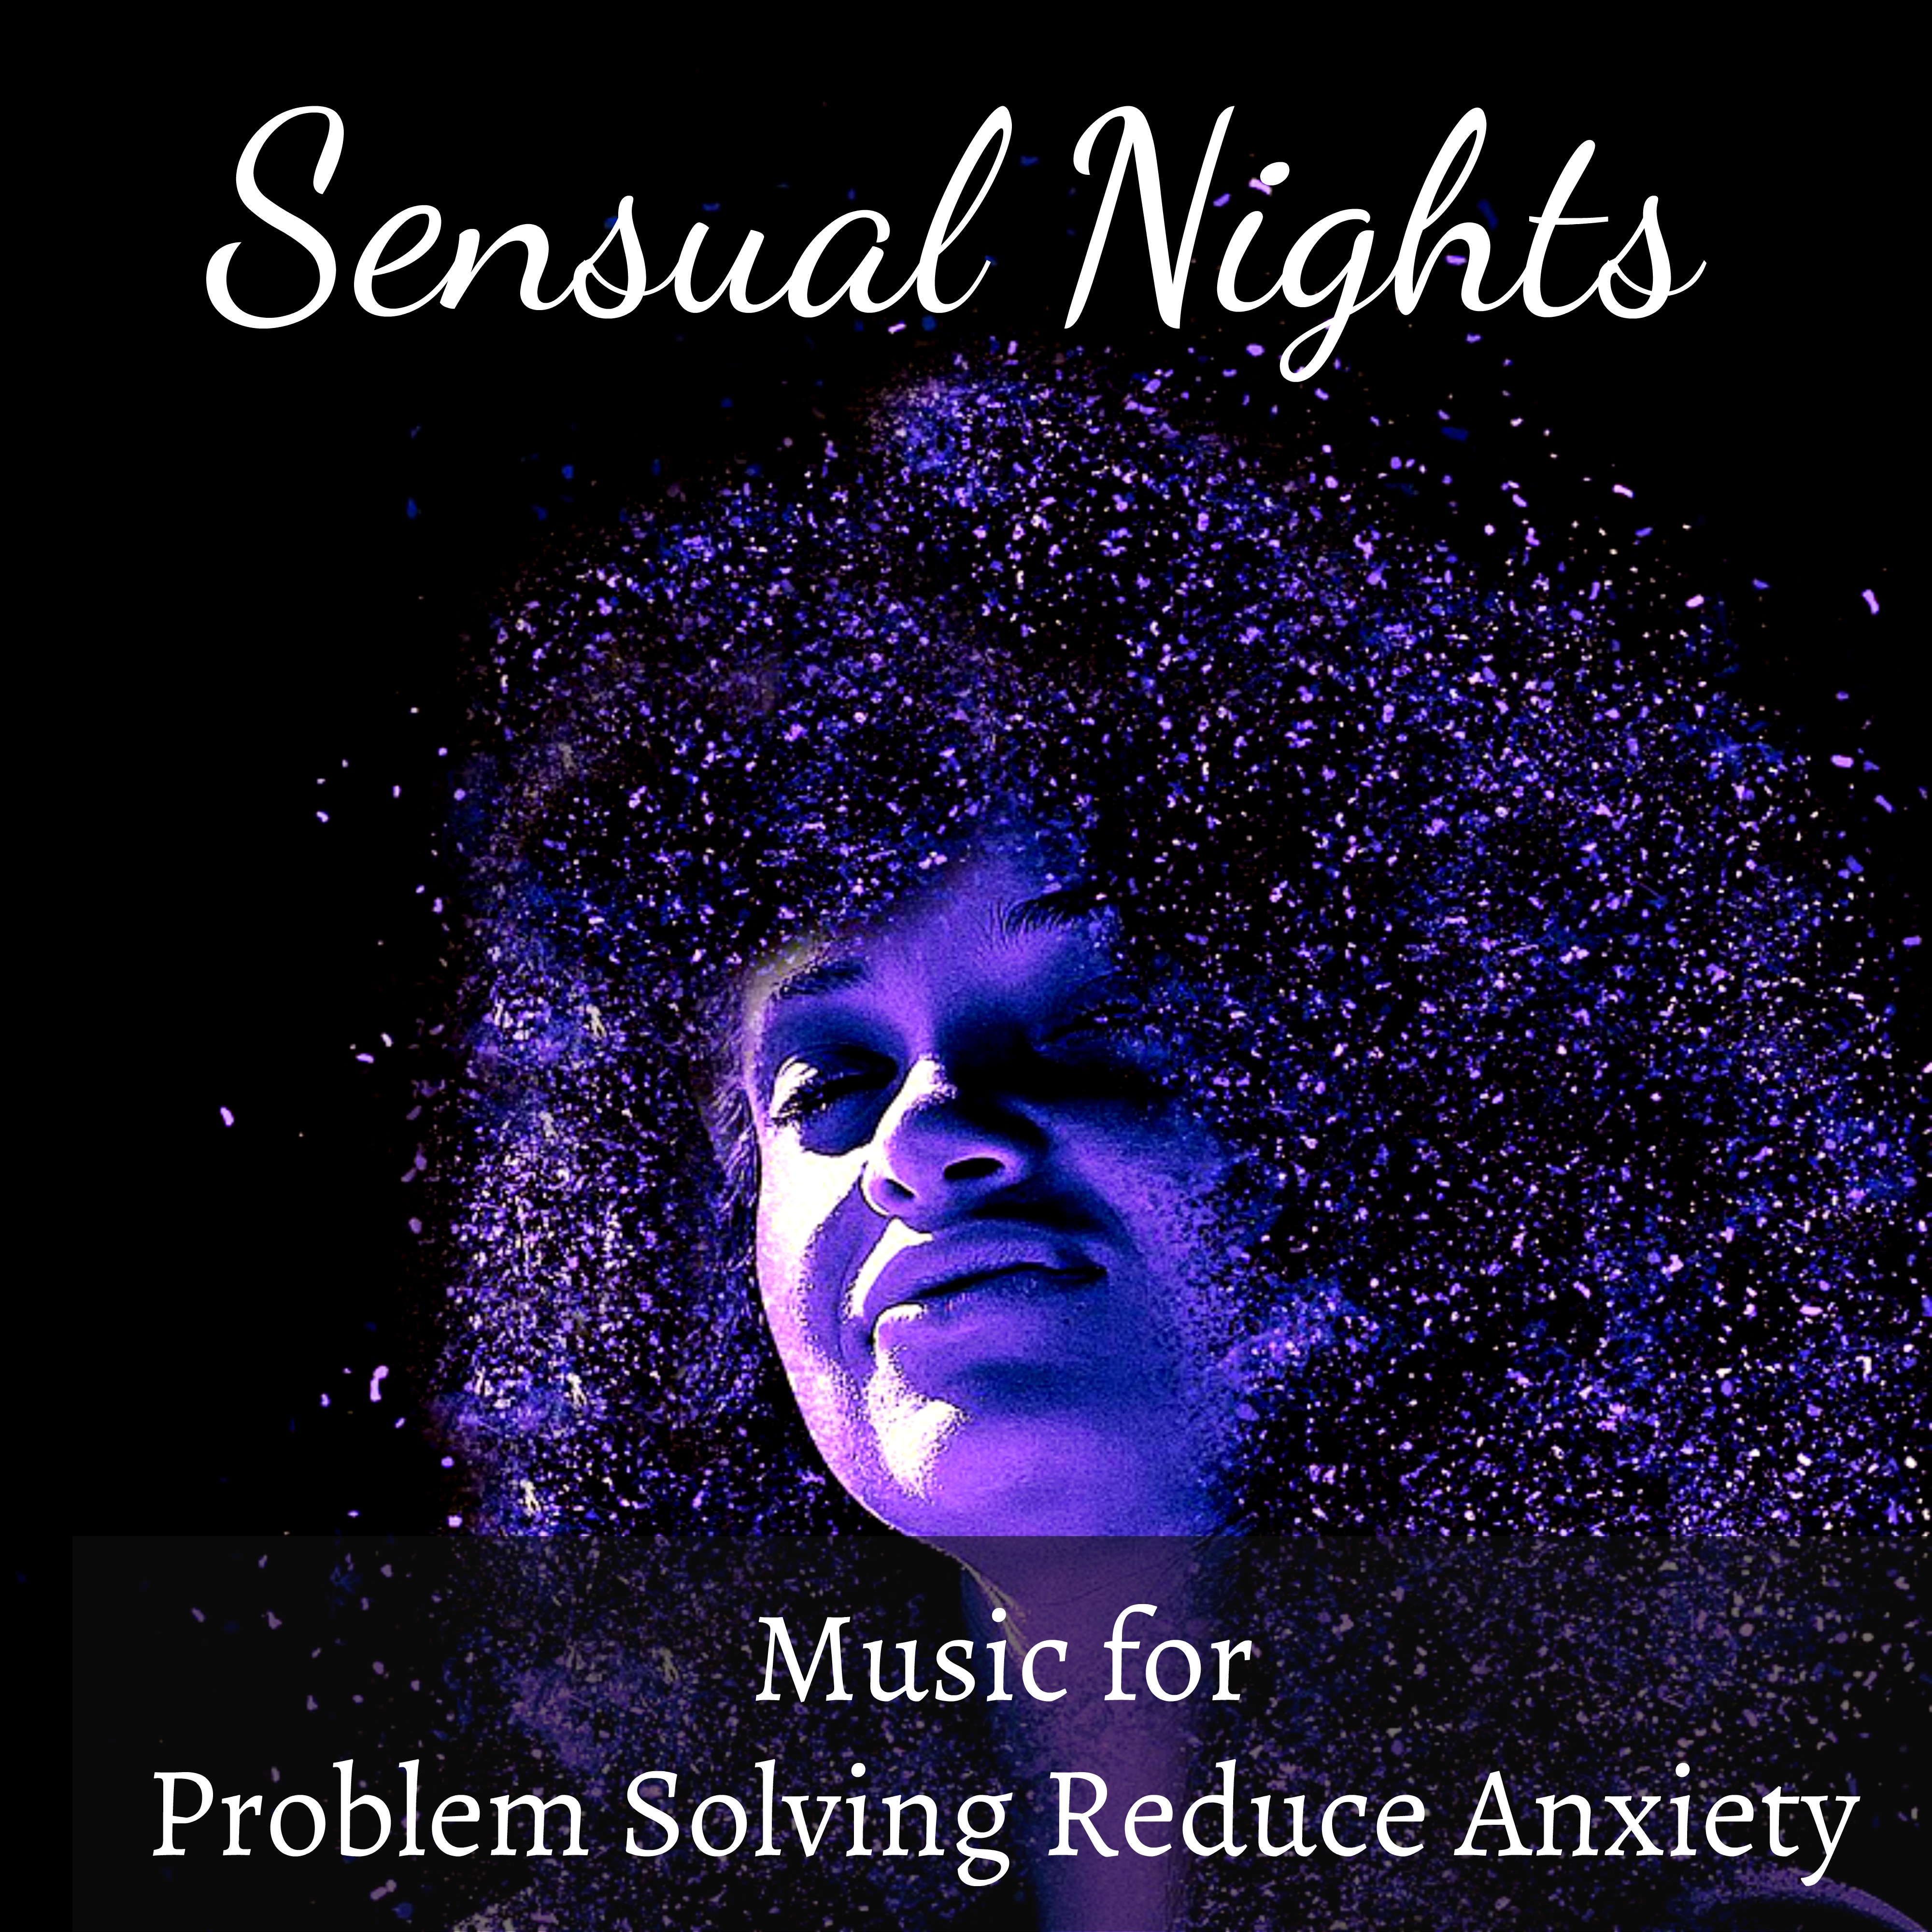 Sensual Nights - Yoga Mindfulness Sleep Music for Problem Solving Meditation Classes Reduce Anxiety with Nature Soothing Binaural Sounds